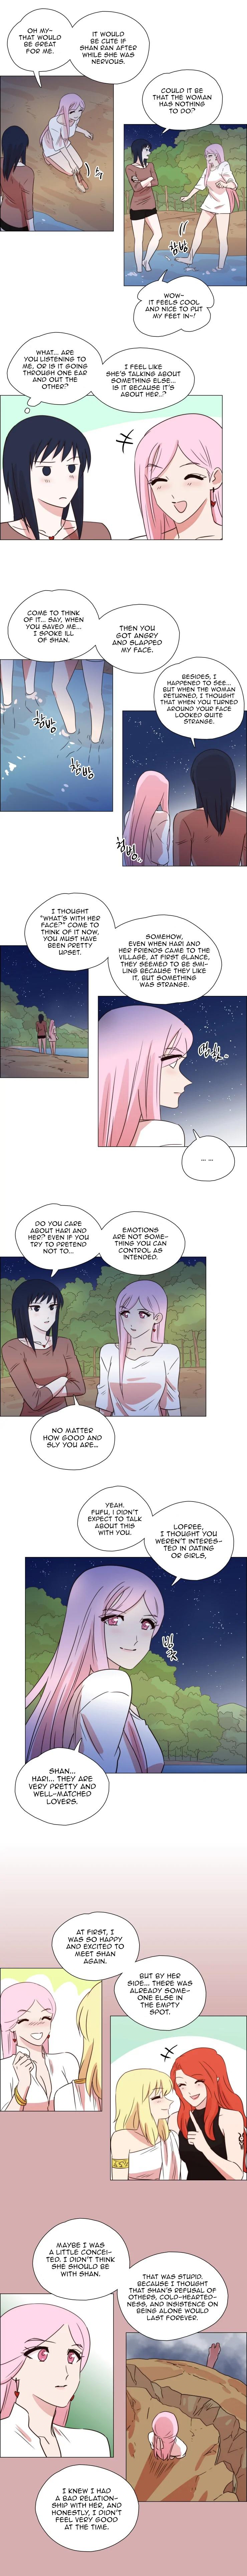 Miss Angel And Miss Devil Chapter 277: Ep 30 - Hold Your Hand In Mine (17) page 5 - Mangakakalot